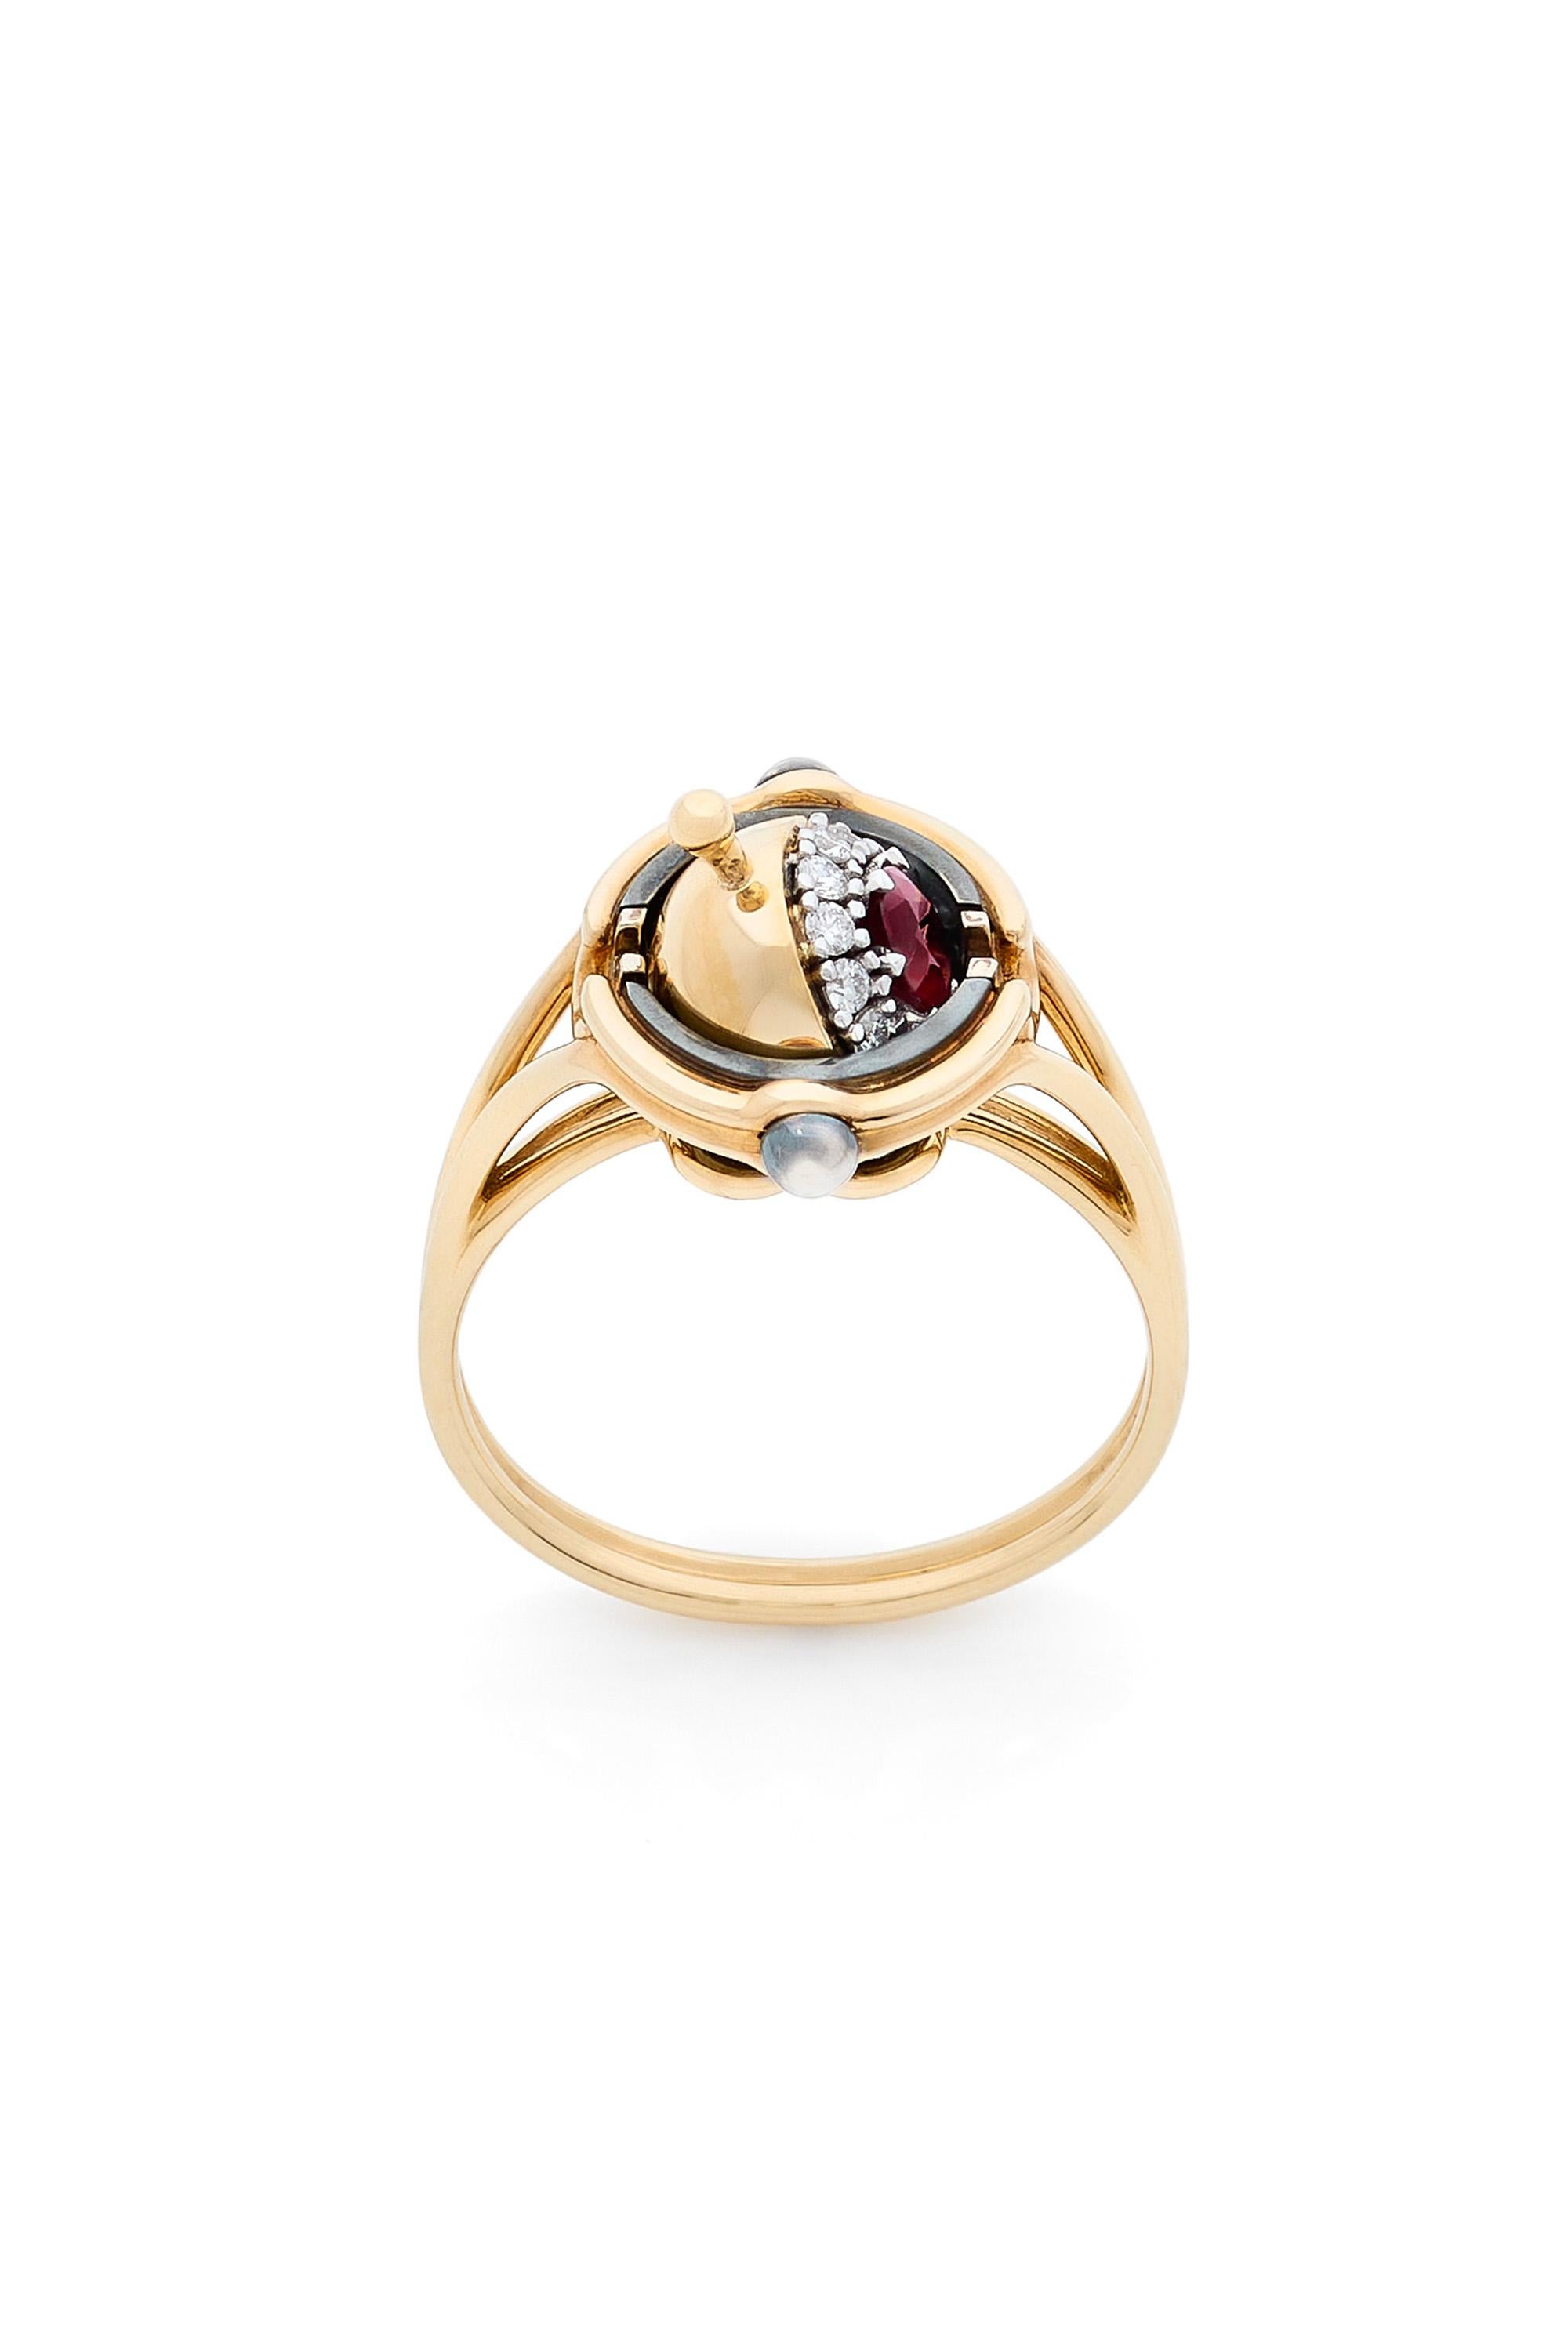 Gold and distressed silver ring. Rotating sphere revealing a ruby surrounded by diamonds.

Details:
Ruby: 0.30 cts
12 Diamonds: 0.15 cts
18k Gold: 5 g
Distressed Silver: 1.5 g
Made in France